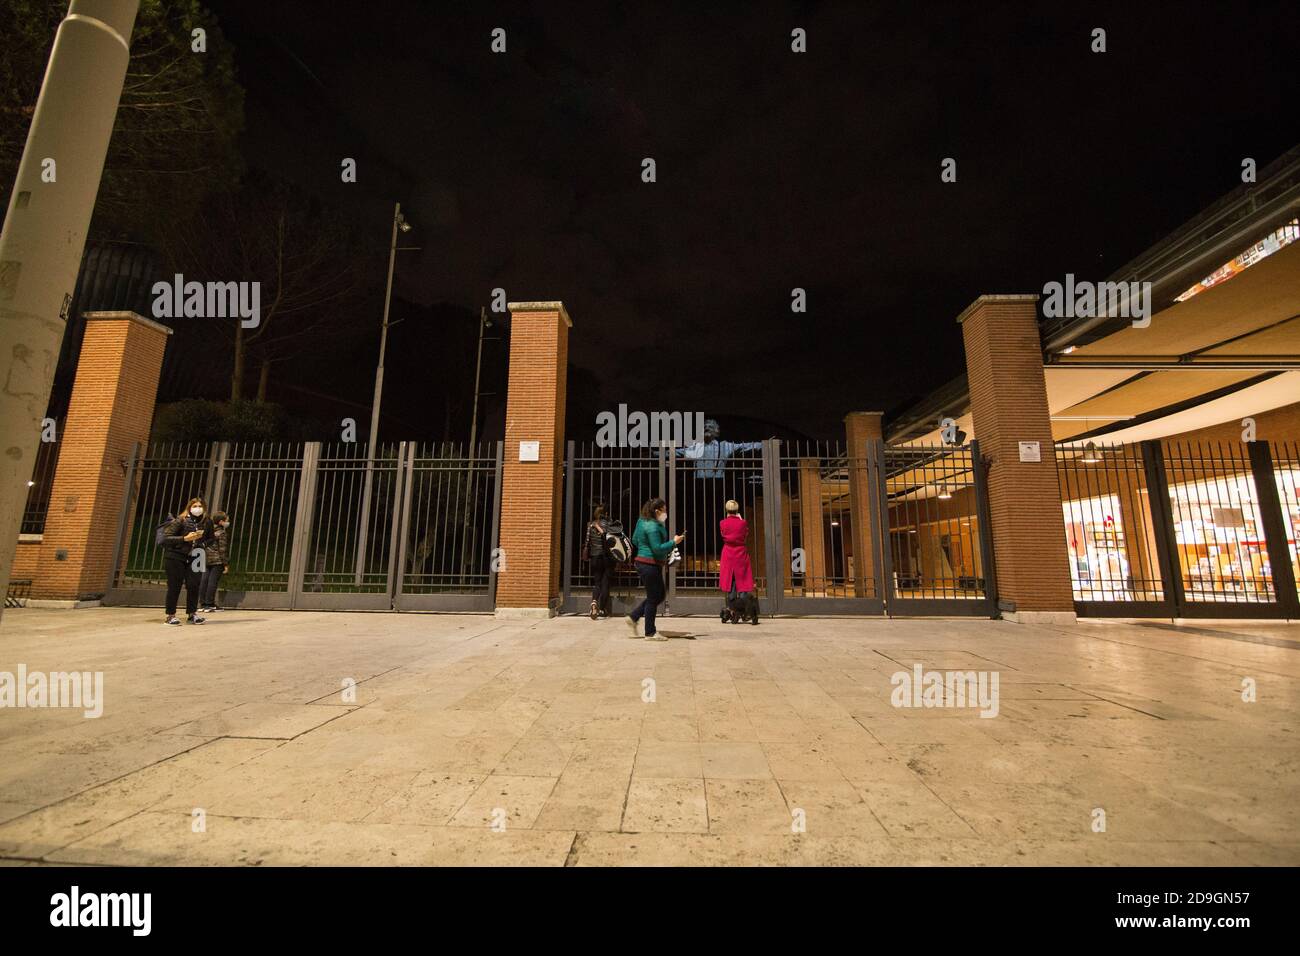 Rome, Italy. 05th Nov, 2020. Photo projected this evening, 5 November 2020, on the dome of the Sinopoli Hall of the Auditorium Parco della Musica in Rome to greet the great Italian actor Gigi Proietti on the day of city mourning. (Photo by Matteo Nardone/Pacific Press) Credit: Pacific Press Media Production Corp./Alamy Live News Stock Photo